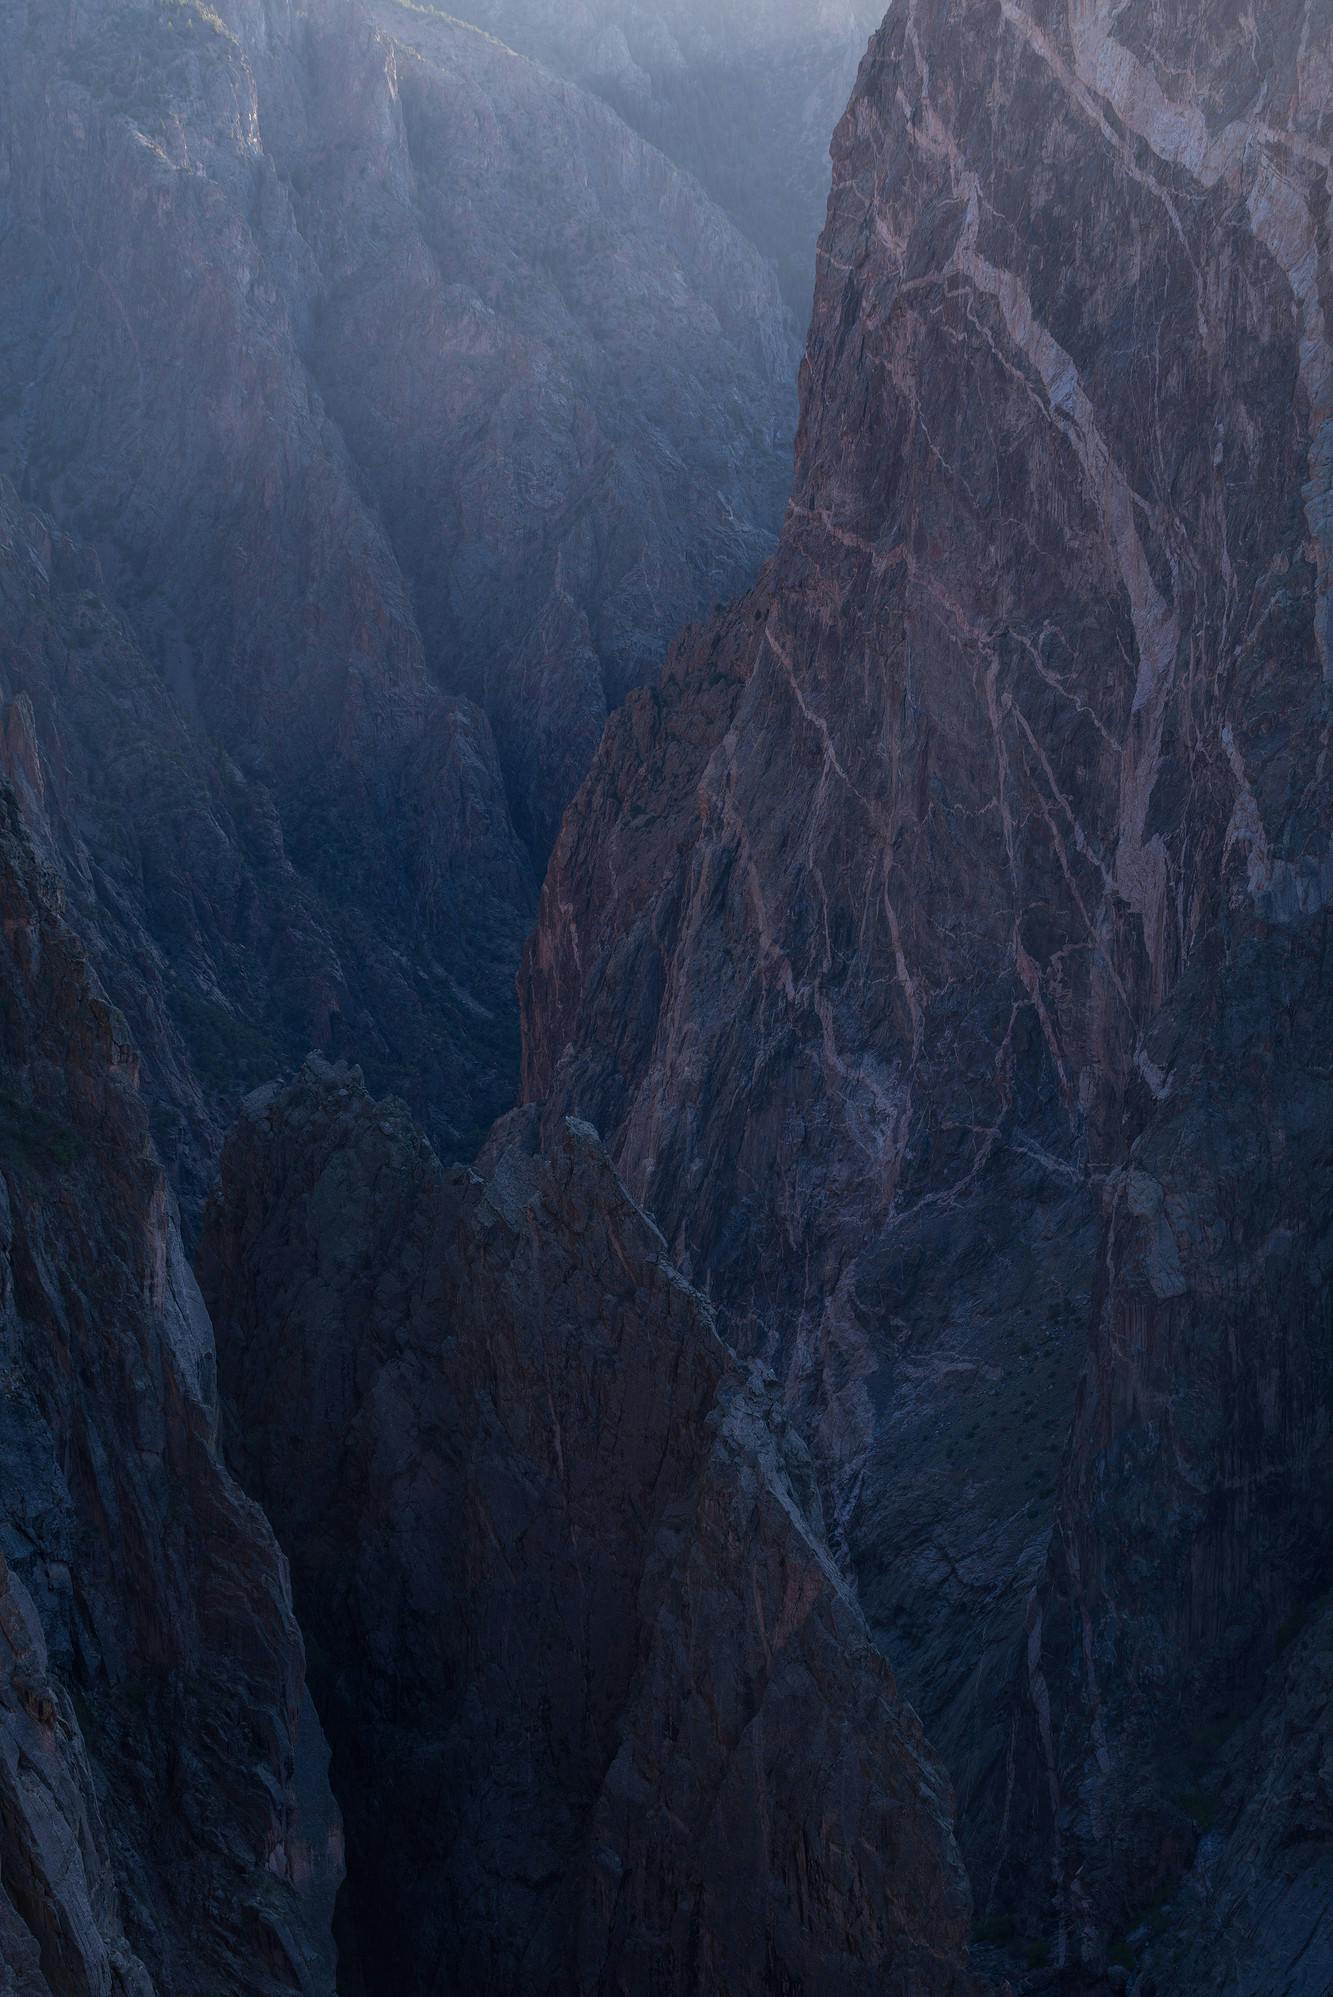 Evening at Black Canyon of the Gunnison #2